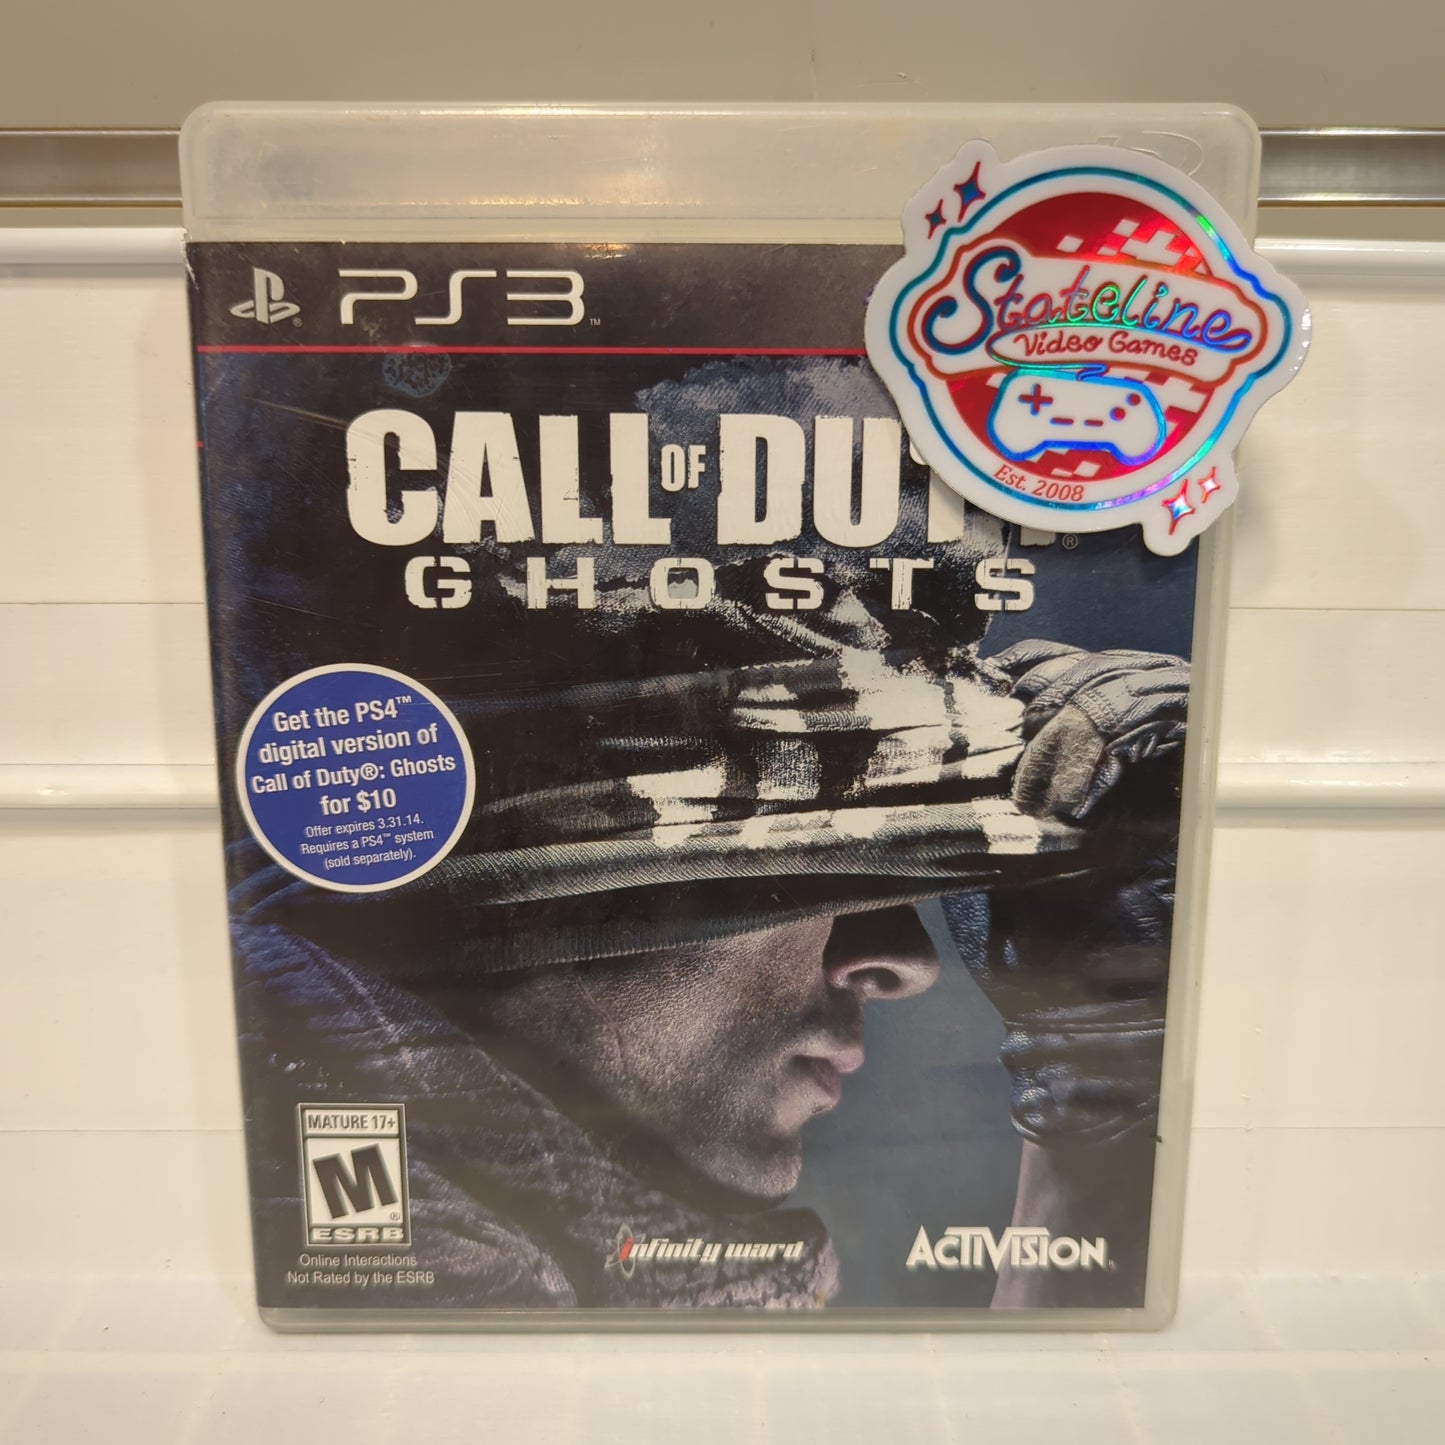 Call of Duty Ghosts - Playstation 3